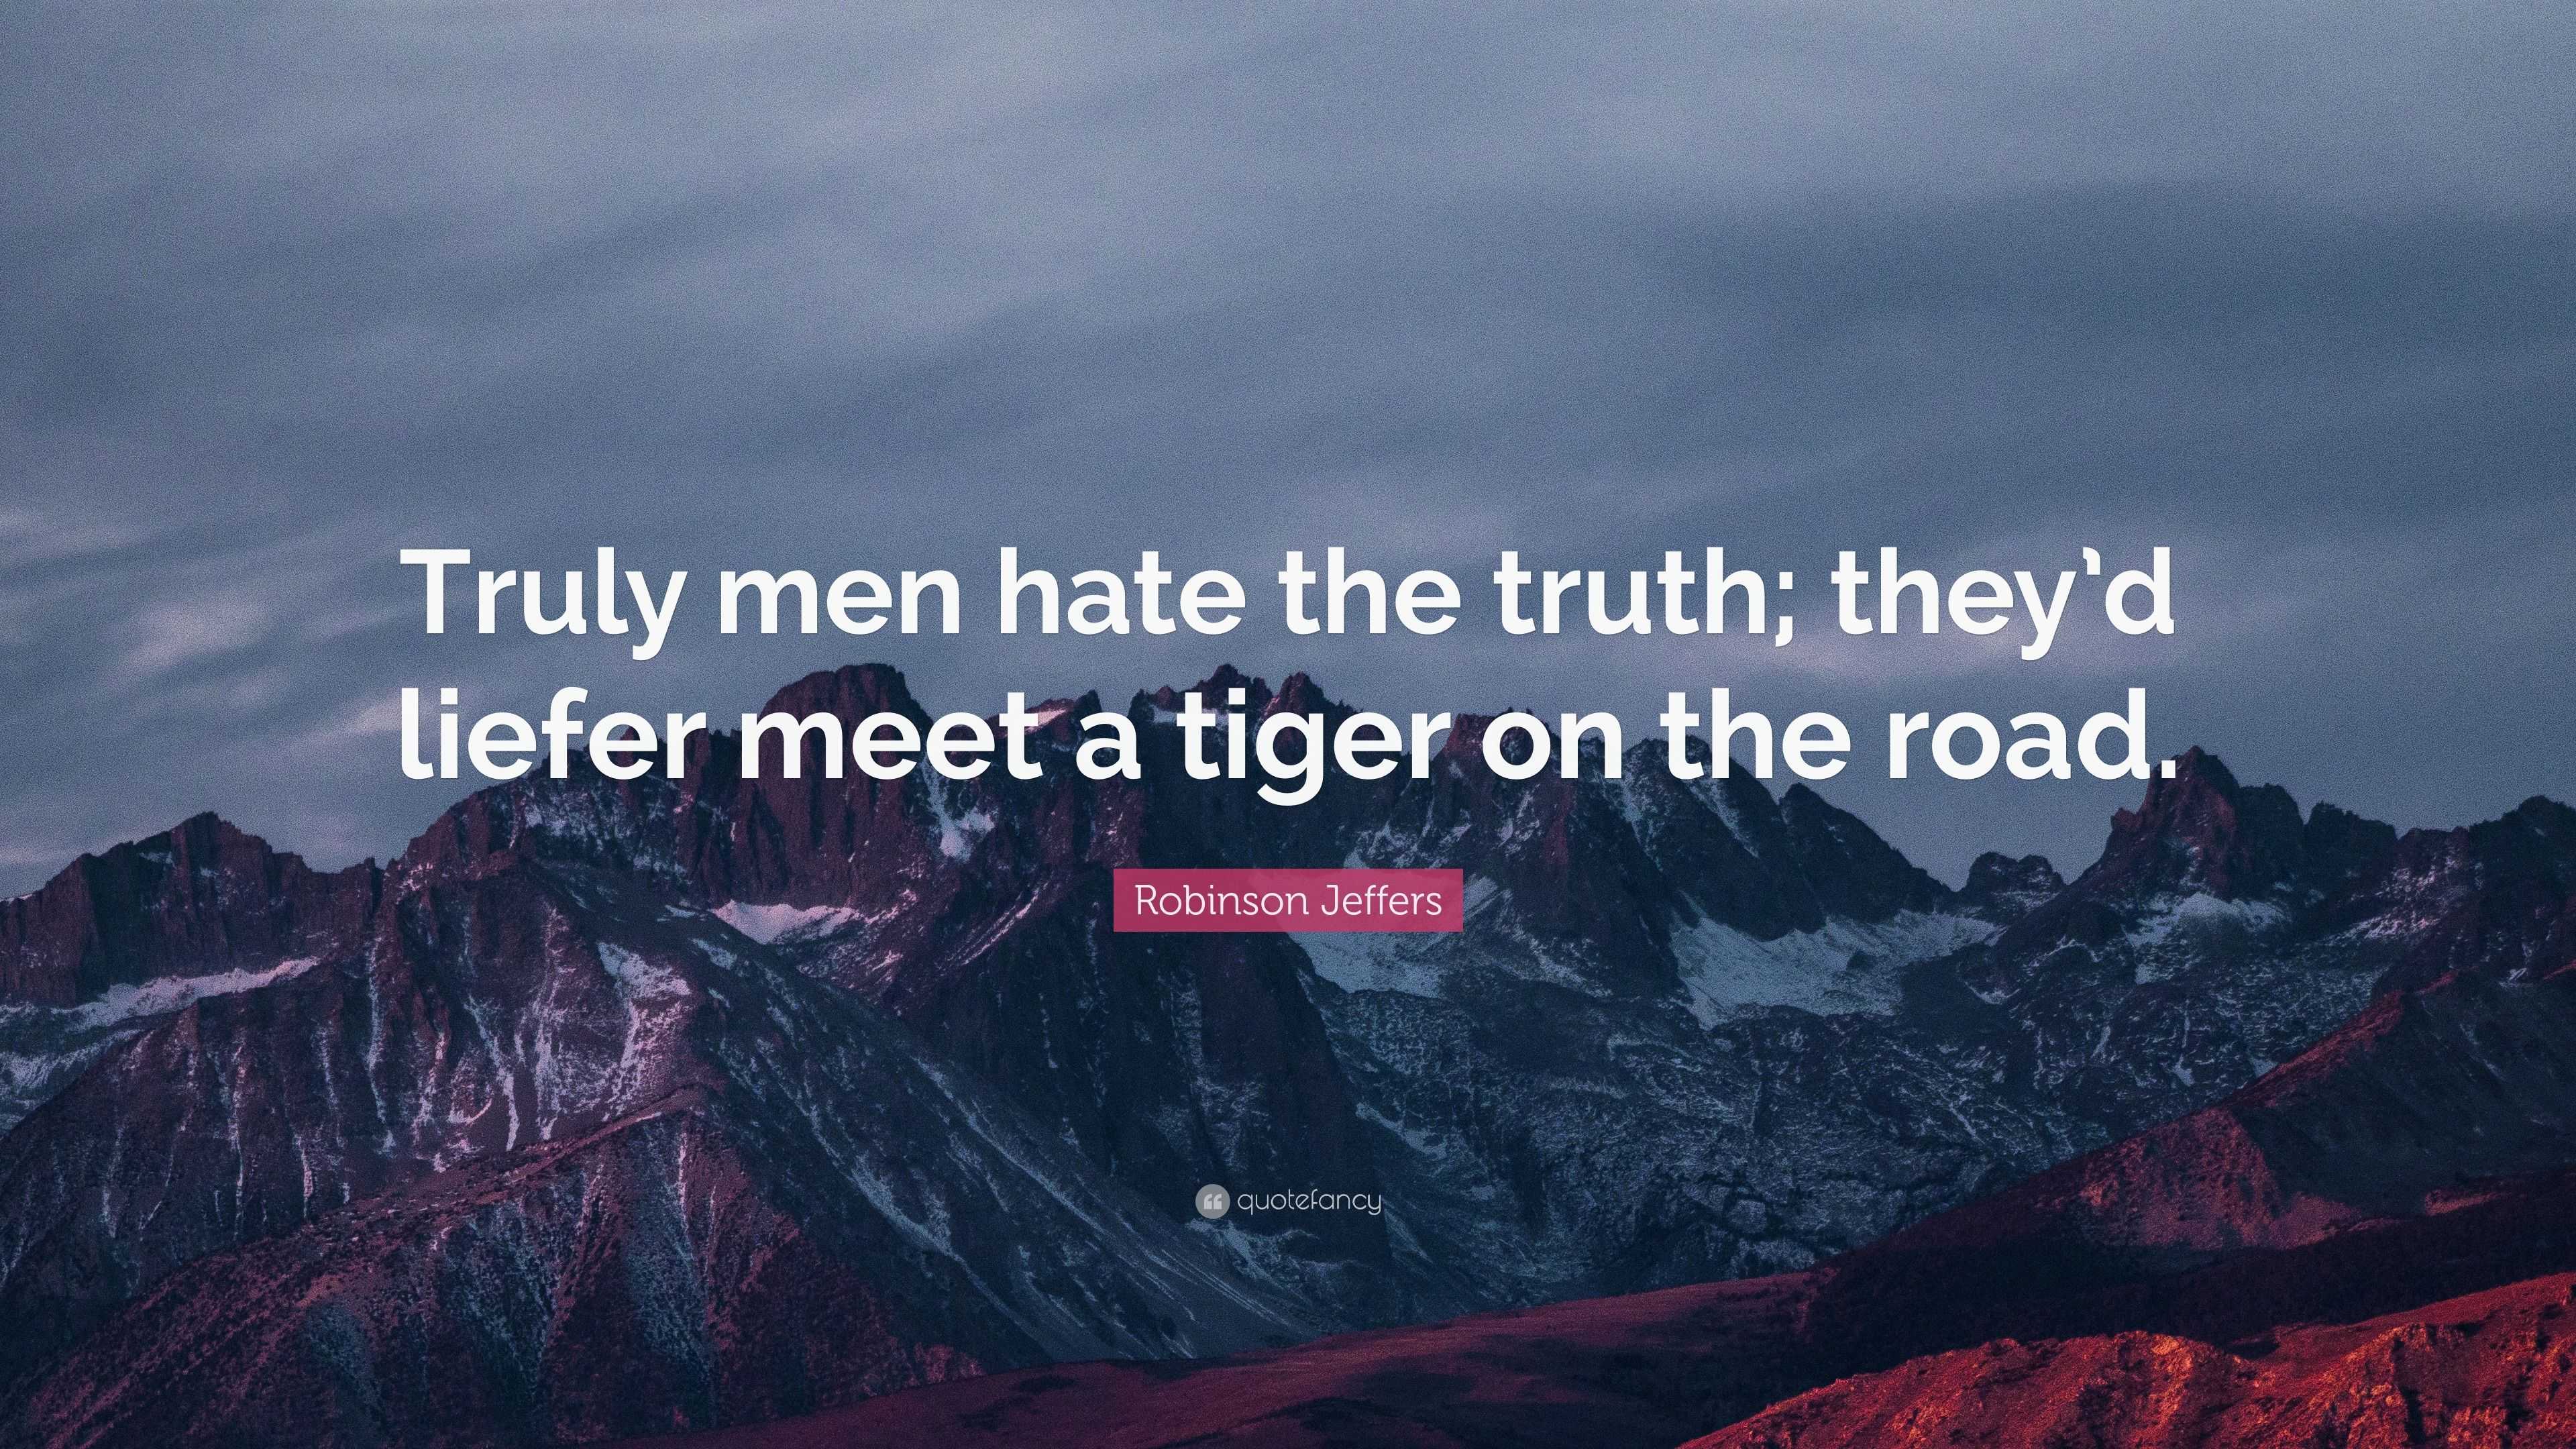 Robinson Jeffers Quote: “Truly men hate the truth; they’d liefer meet a ...